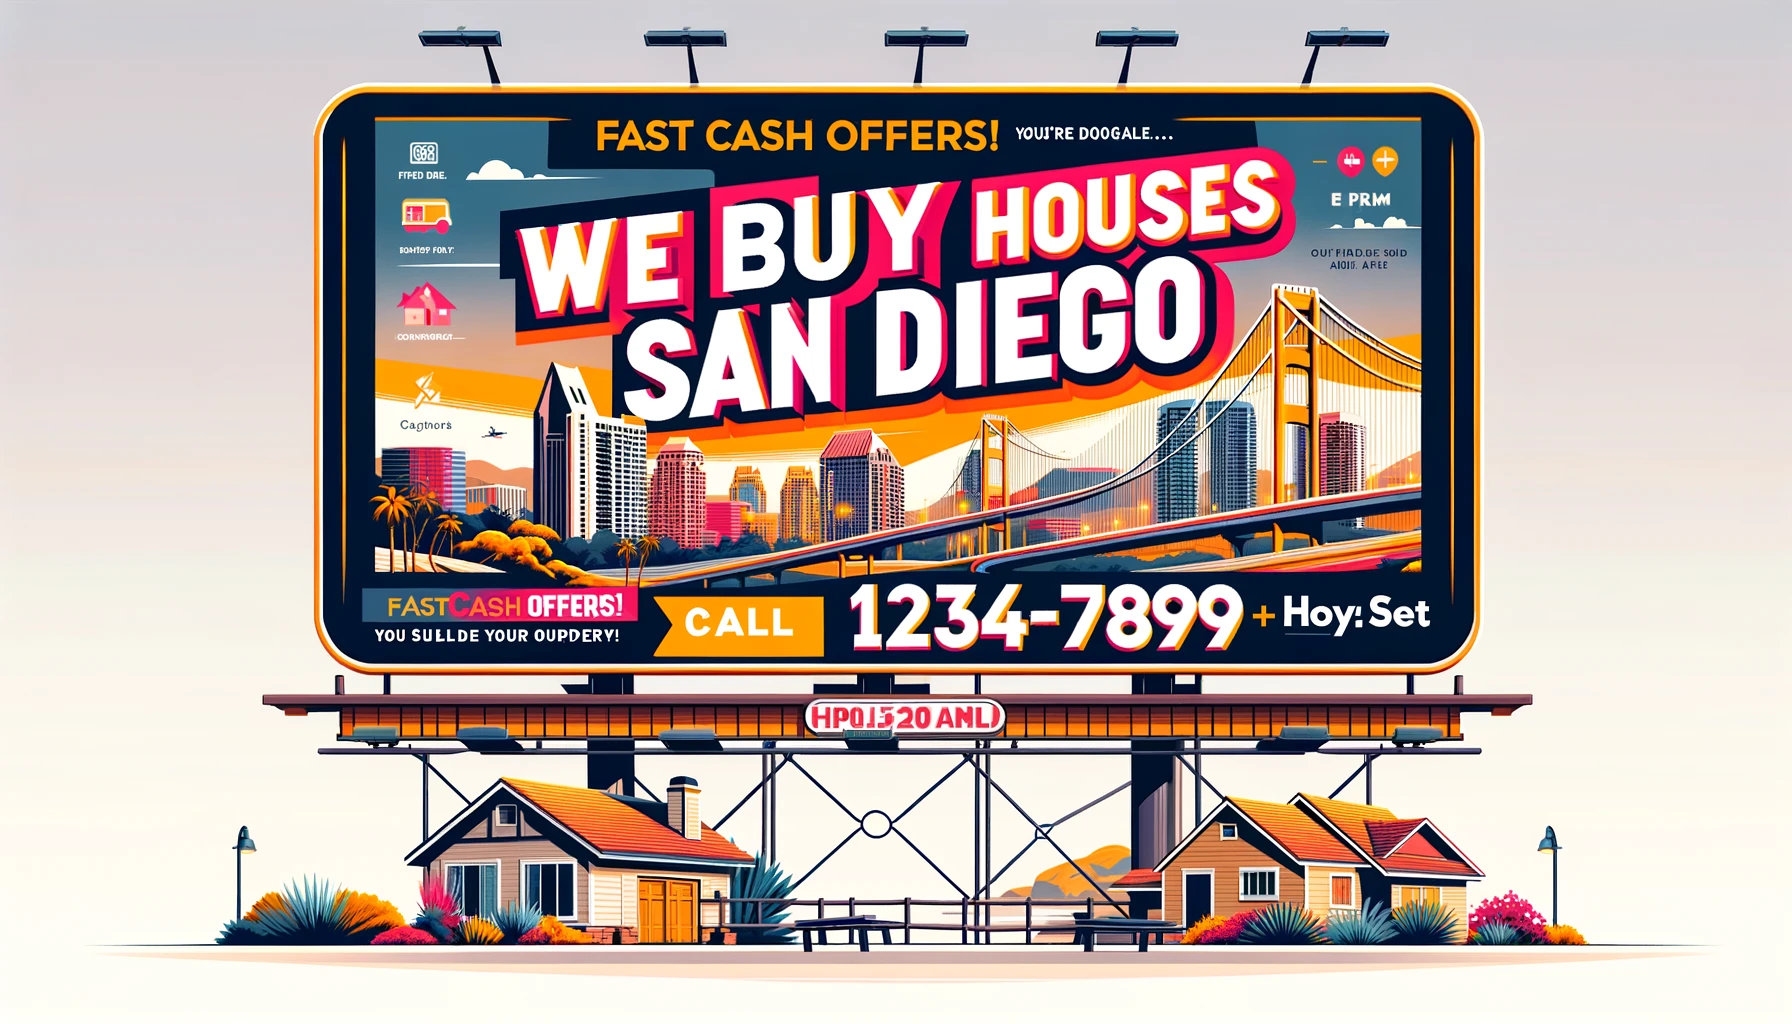 eye-catching billboard design for 'We Buy Houses San Diego' featuring iconic San Diego landmarks and a bright, inviting color scheme.